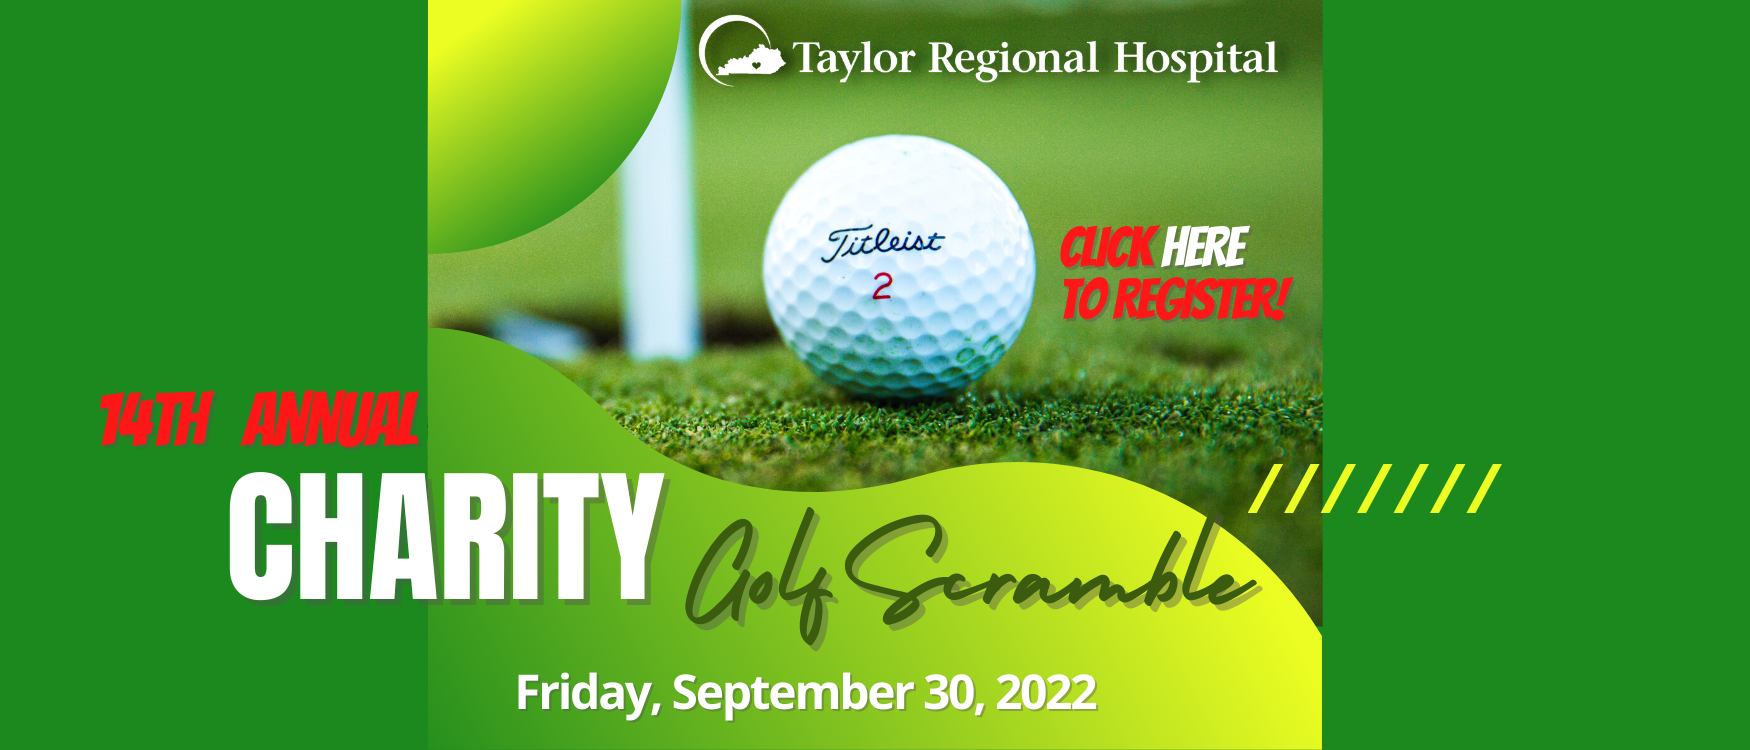 Taylor Regional Hospital 
14th ANNUAL CHARITY Golf scramble
Friday, September 30, 2022

(Click Here